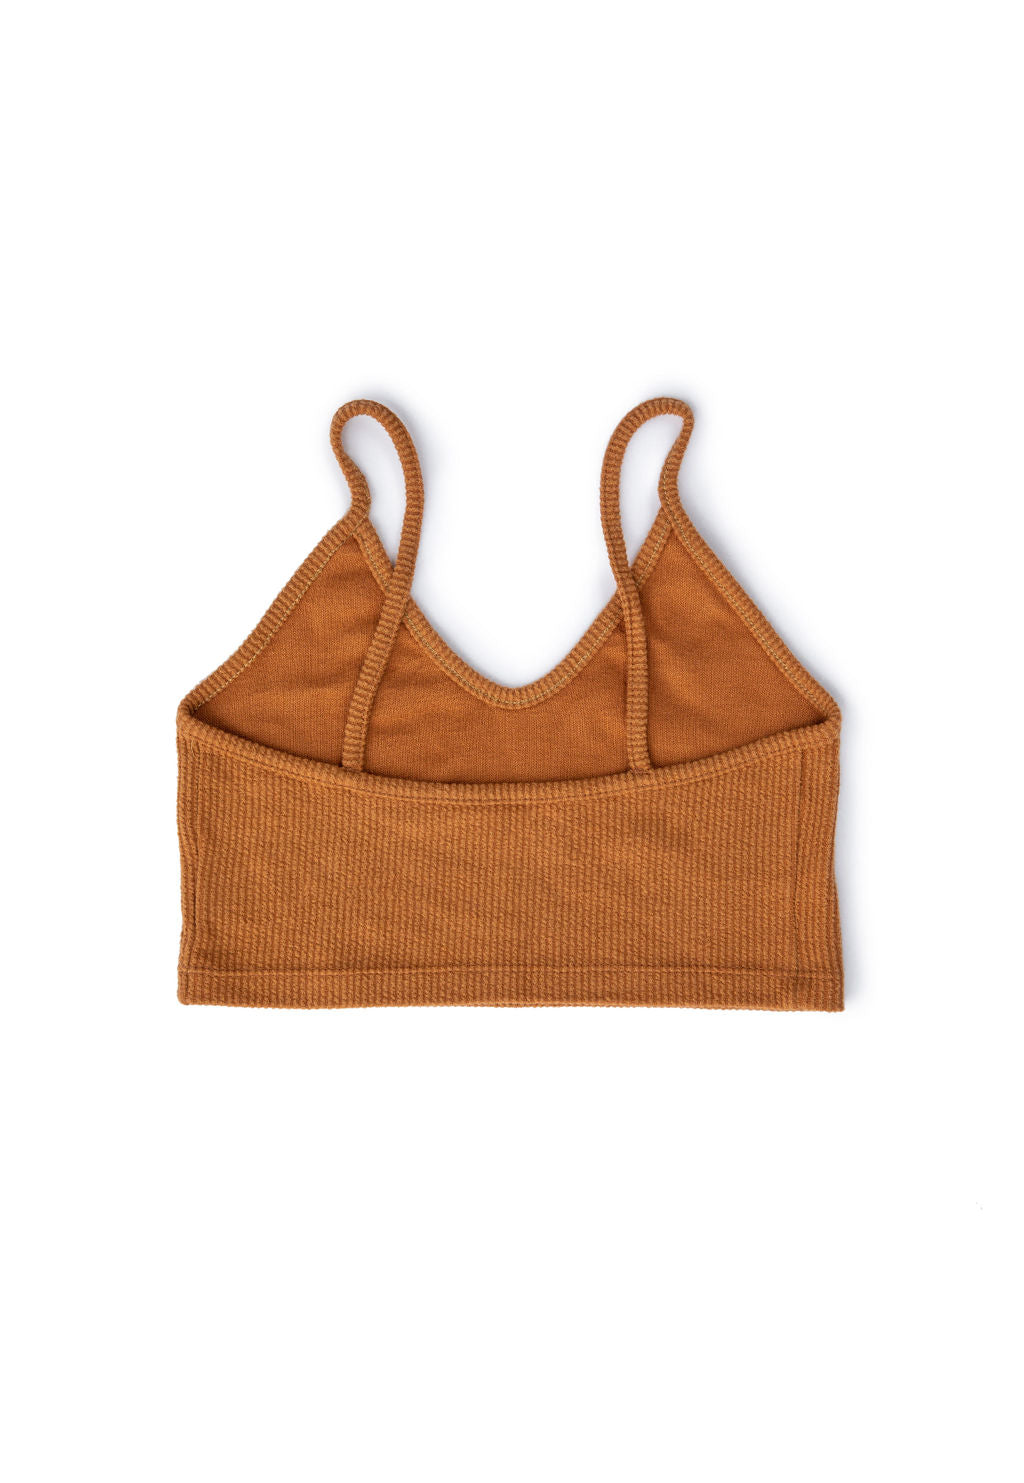 Be one with the sun. This glowing sienna crop top is made with soft, ribbed cotton for your comfort. Spaghetti straps and a not-too-tight fit make it feel like you’re wearing nothing — perfect for hot days (and nights) when clothes feel like a burden. Pair it with the Under the Tucson Sun Flowy Short and let your natural glow shine through. 